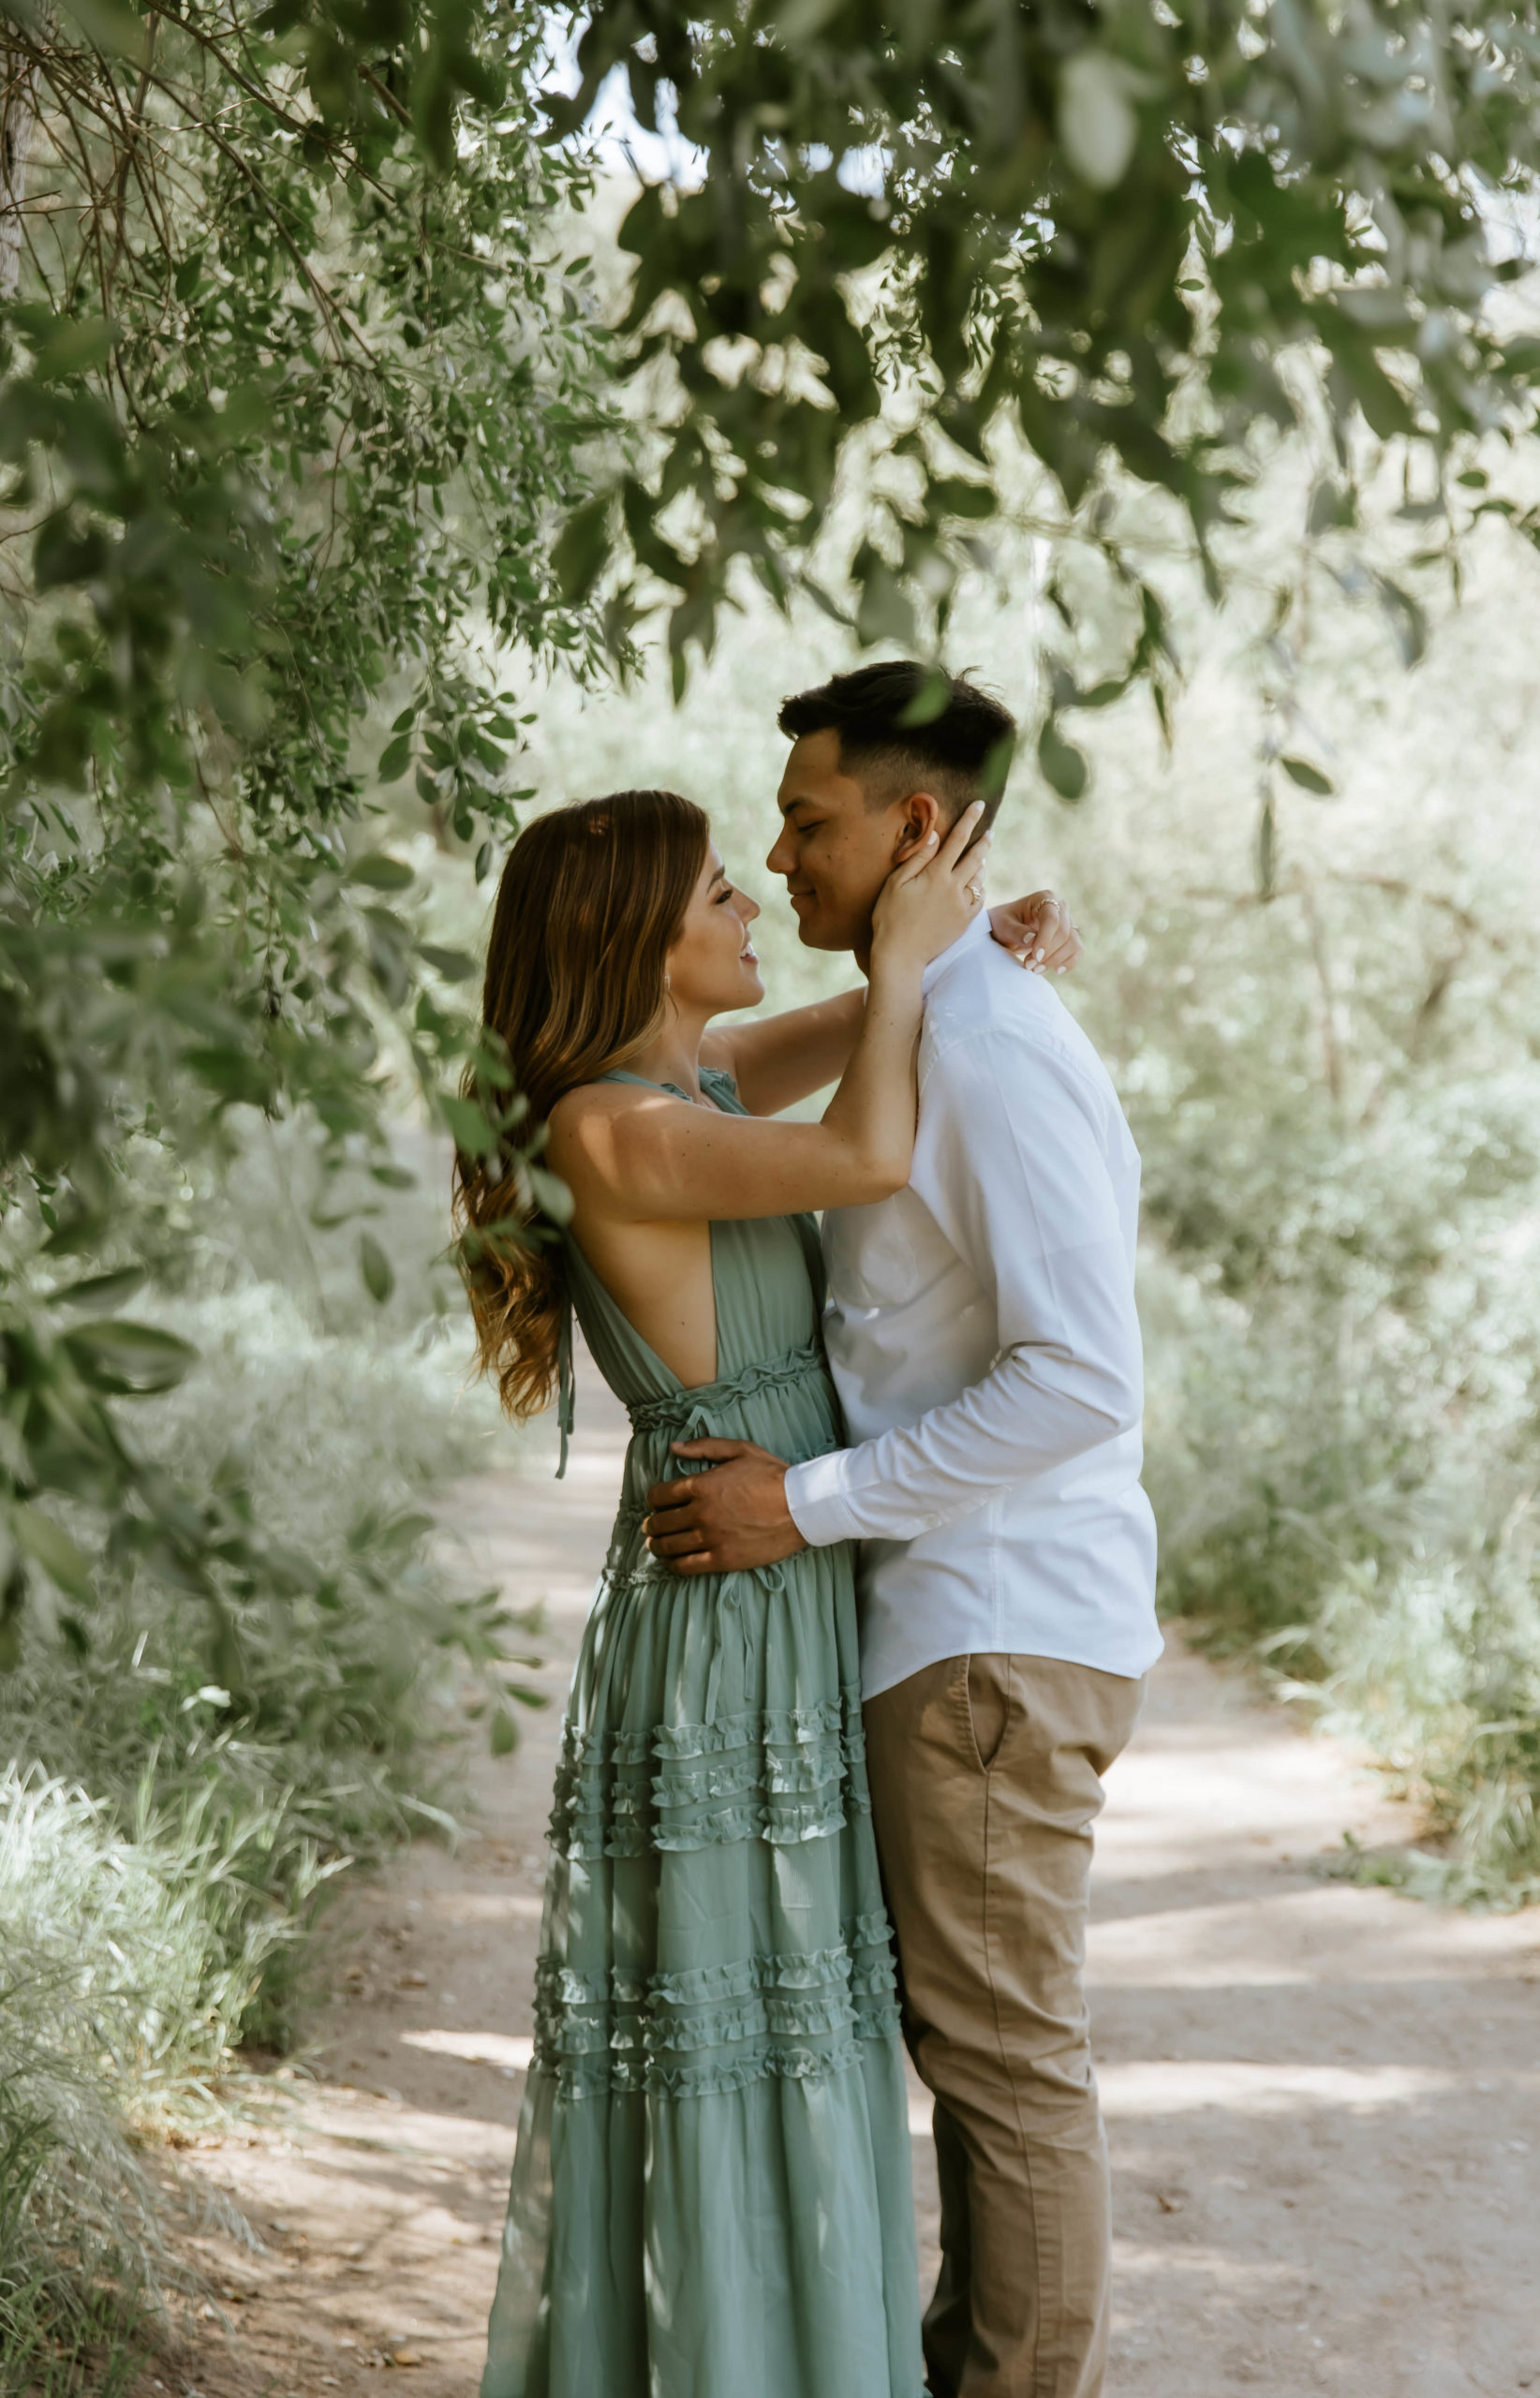 couple sharing an intimate moment under some trees during their engagement photos